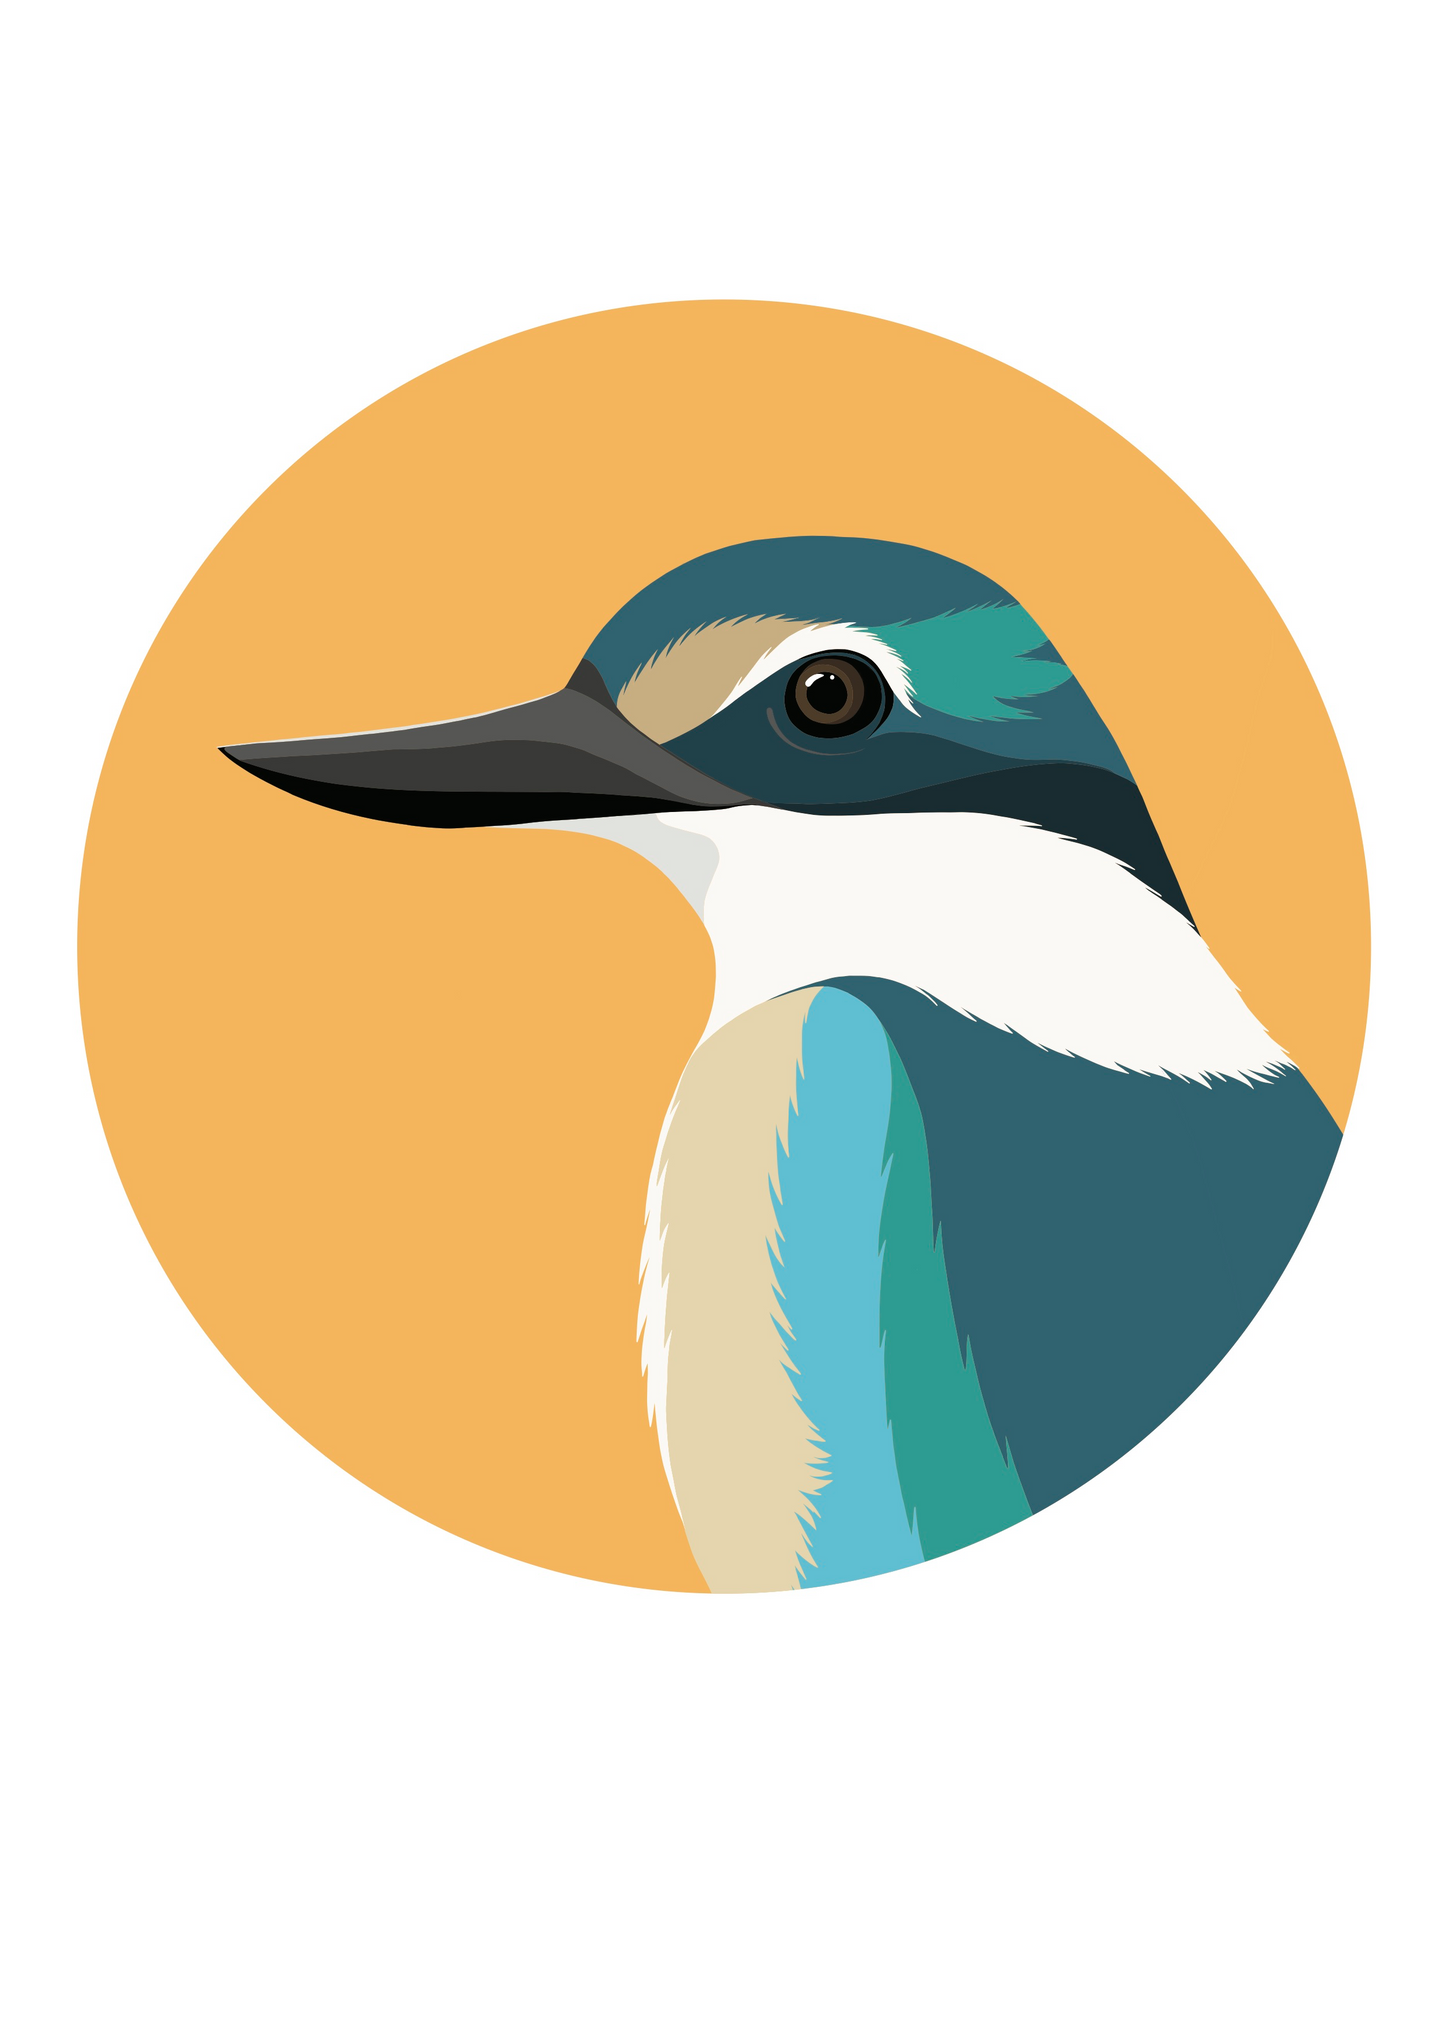 Round art spot, wall decal of the Kingfisher bird, by Hansby Design